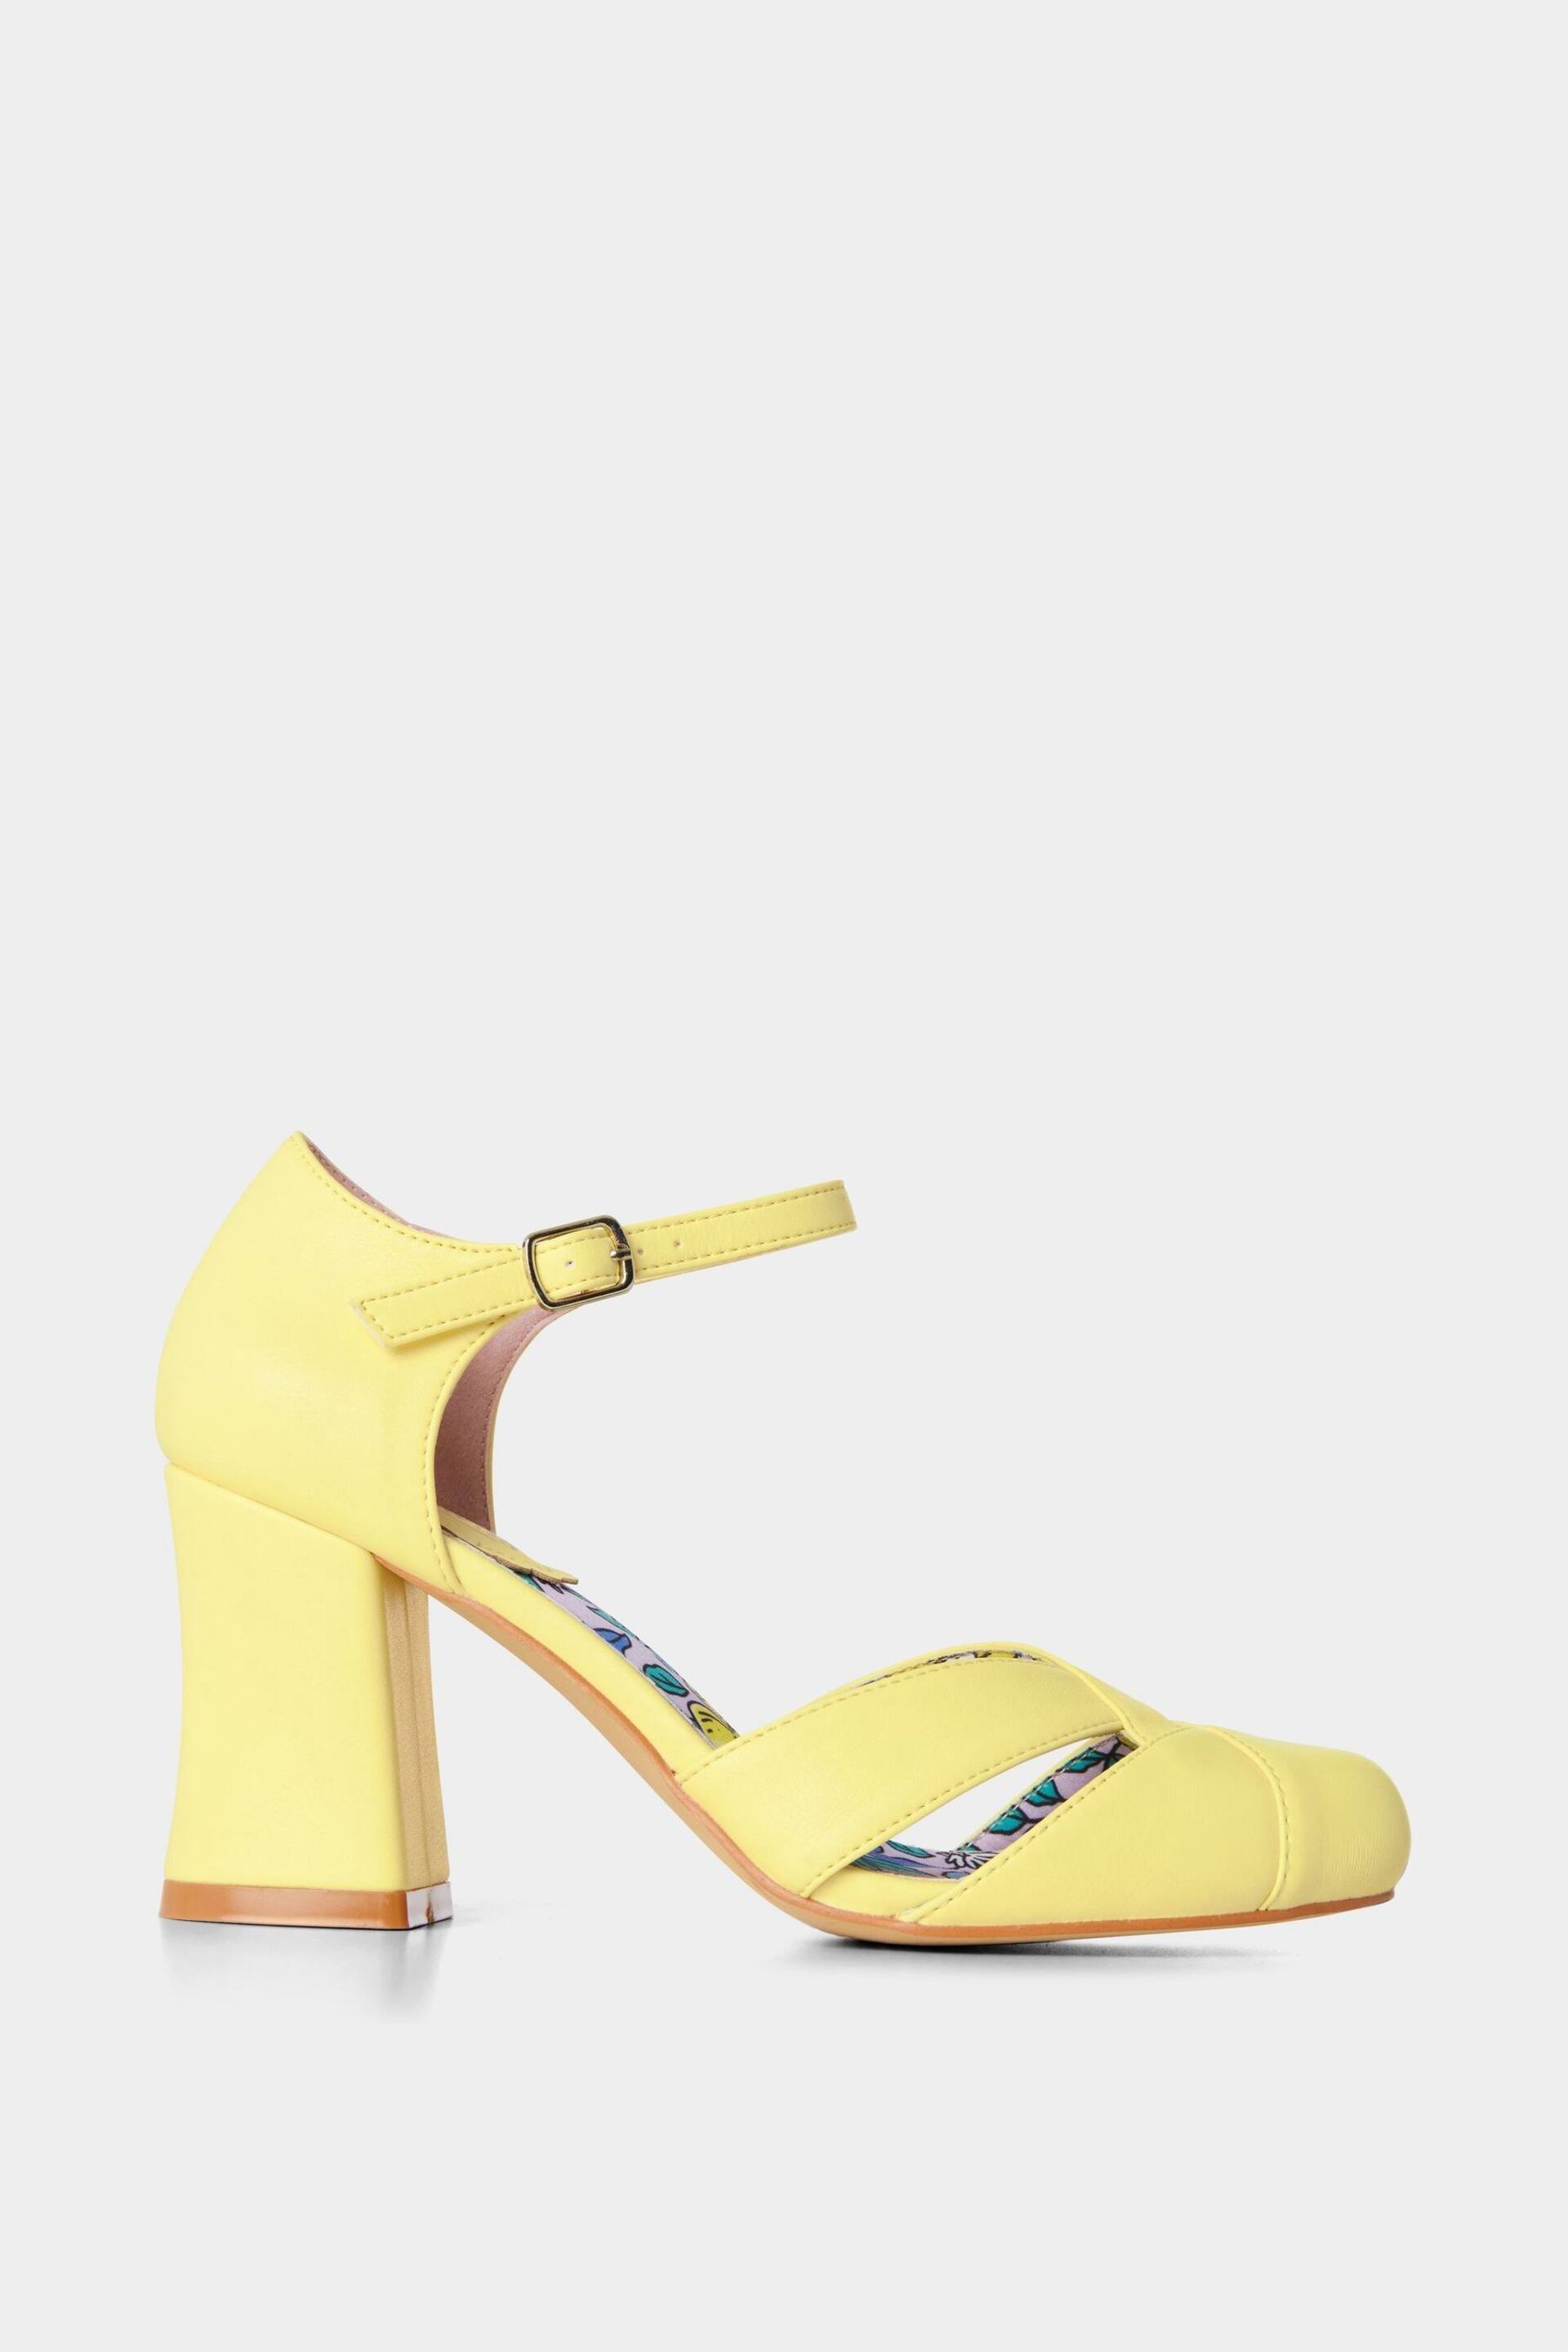 Joe Browns Yellow Summery Vintage Heeled Shoes - Image 2 of 5